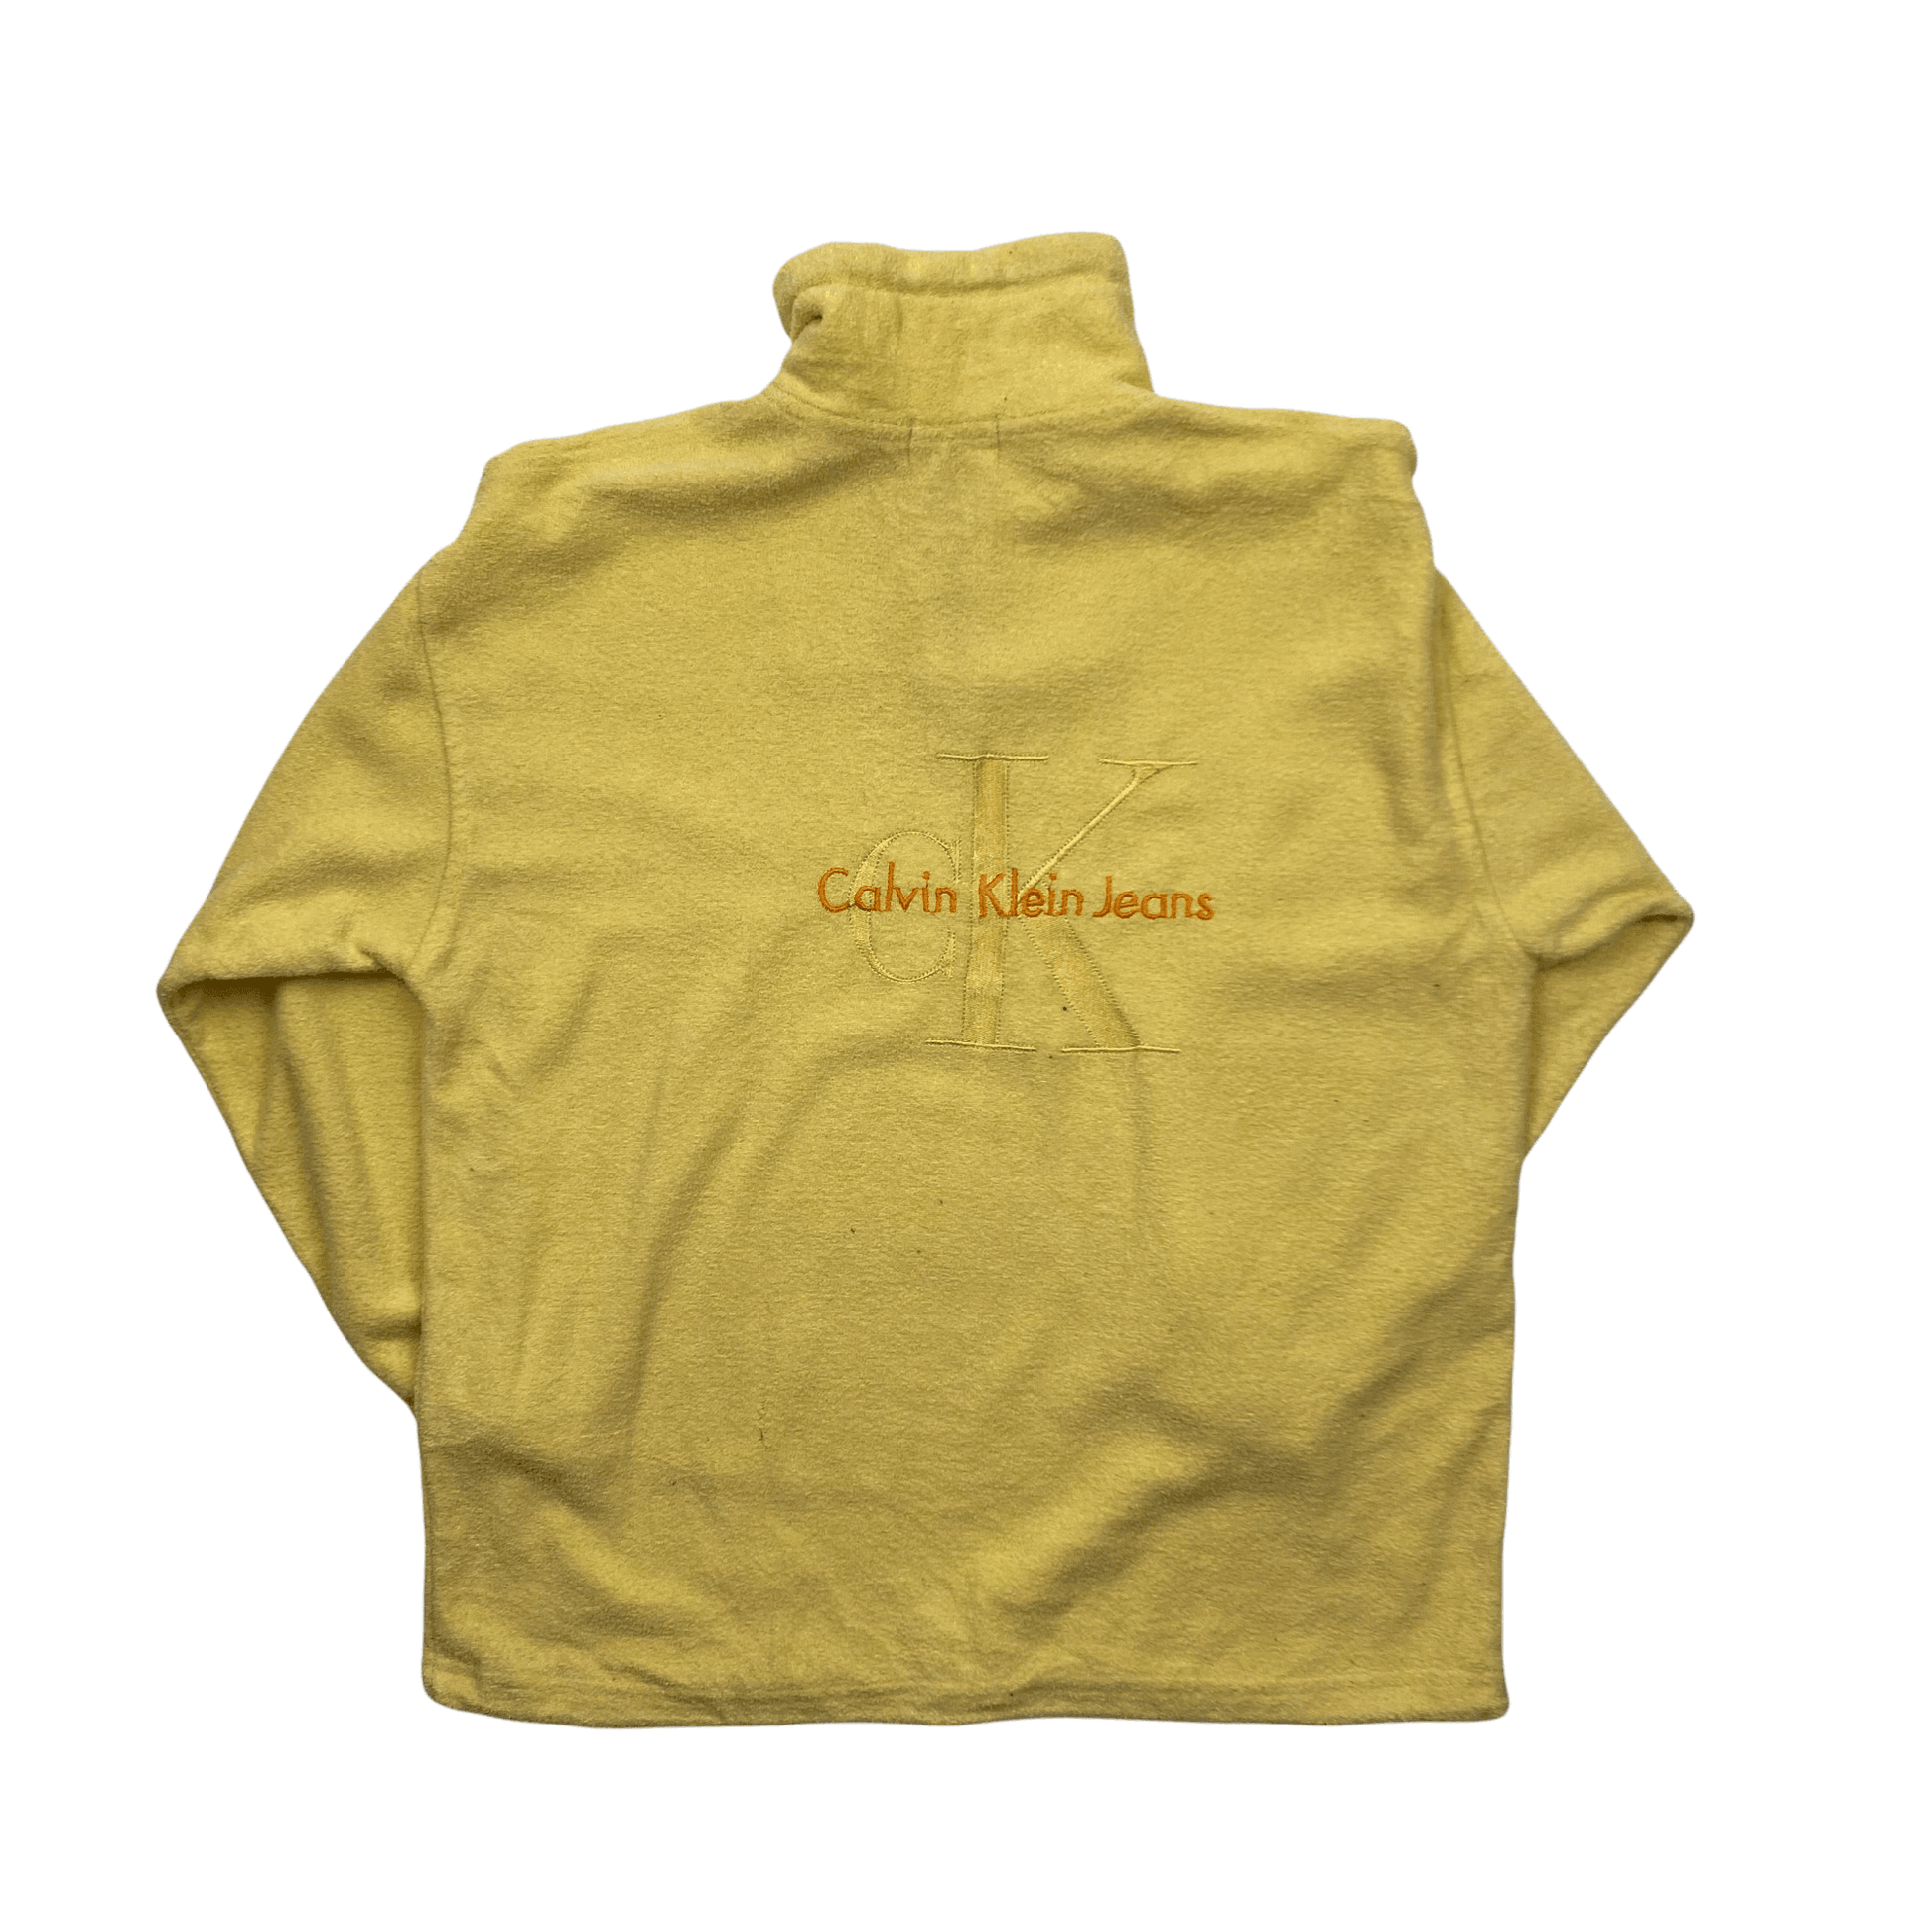 Vintage 90s Yellow Calvin Klein Jeans Spell-Out Quarter Zip Fleece - Small (Recommended Size - Medium) - The Streetwear Studio